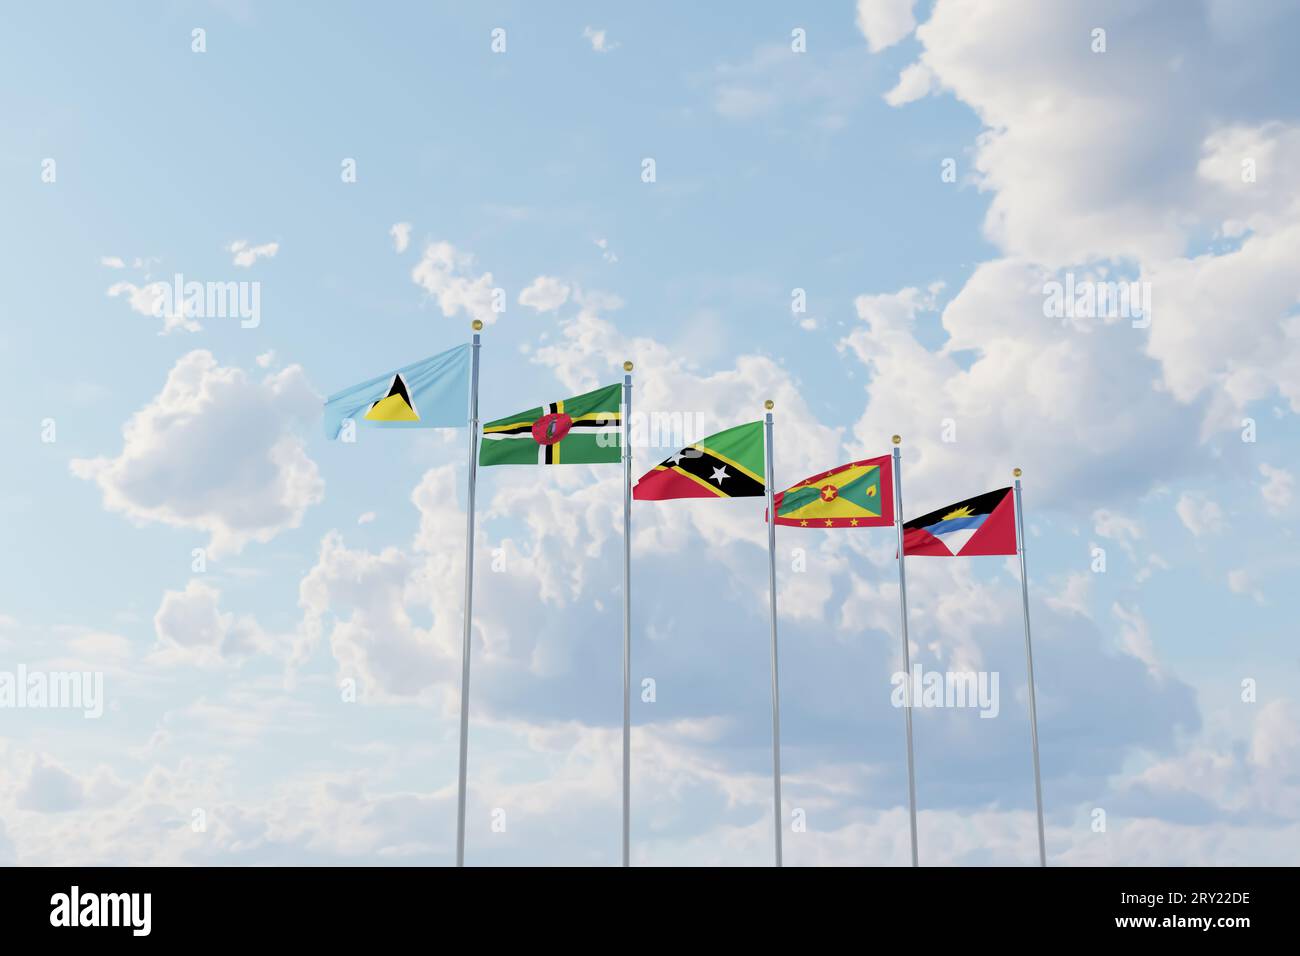 Flags of Caribbean countries Saint Kitts and Nevis, Dominica, Saint Lucia, Grenada, Antigua and Barbuda Stock Photo